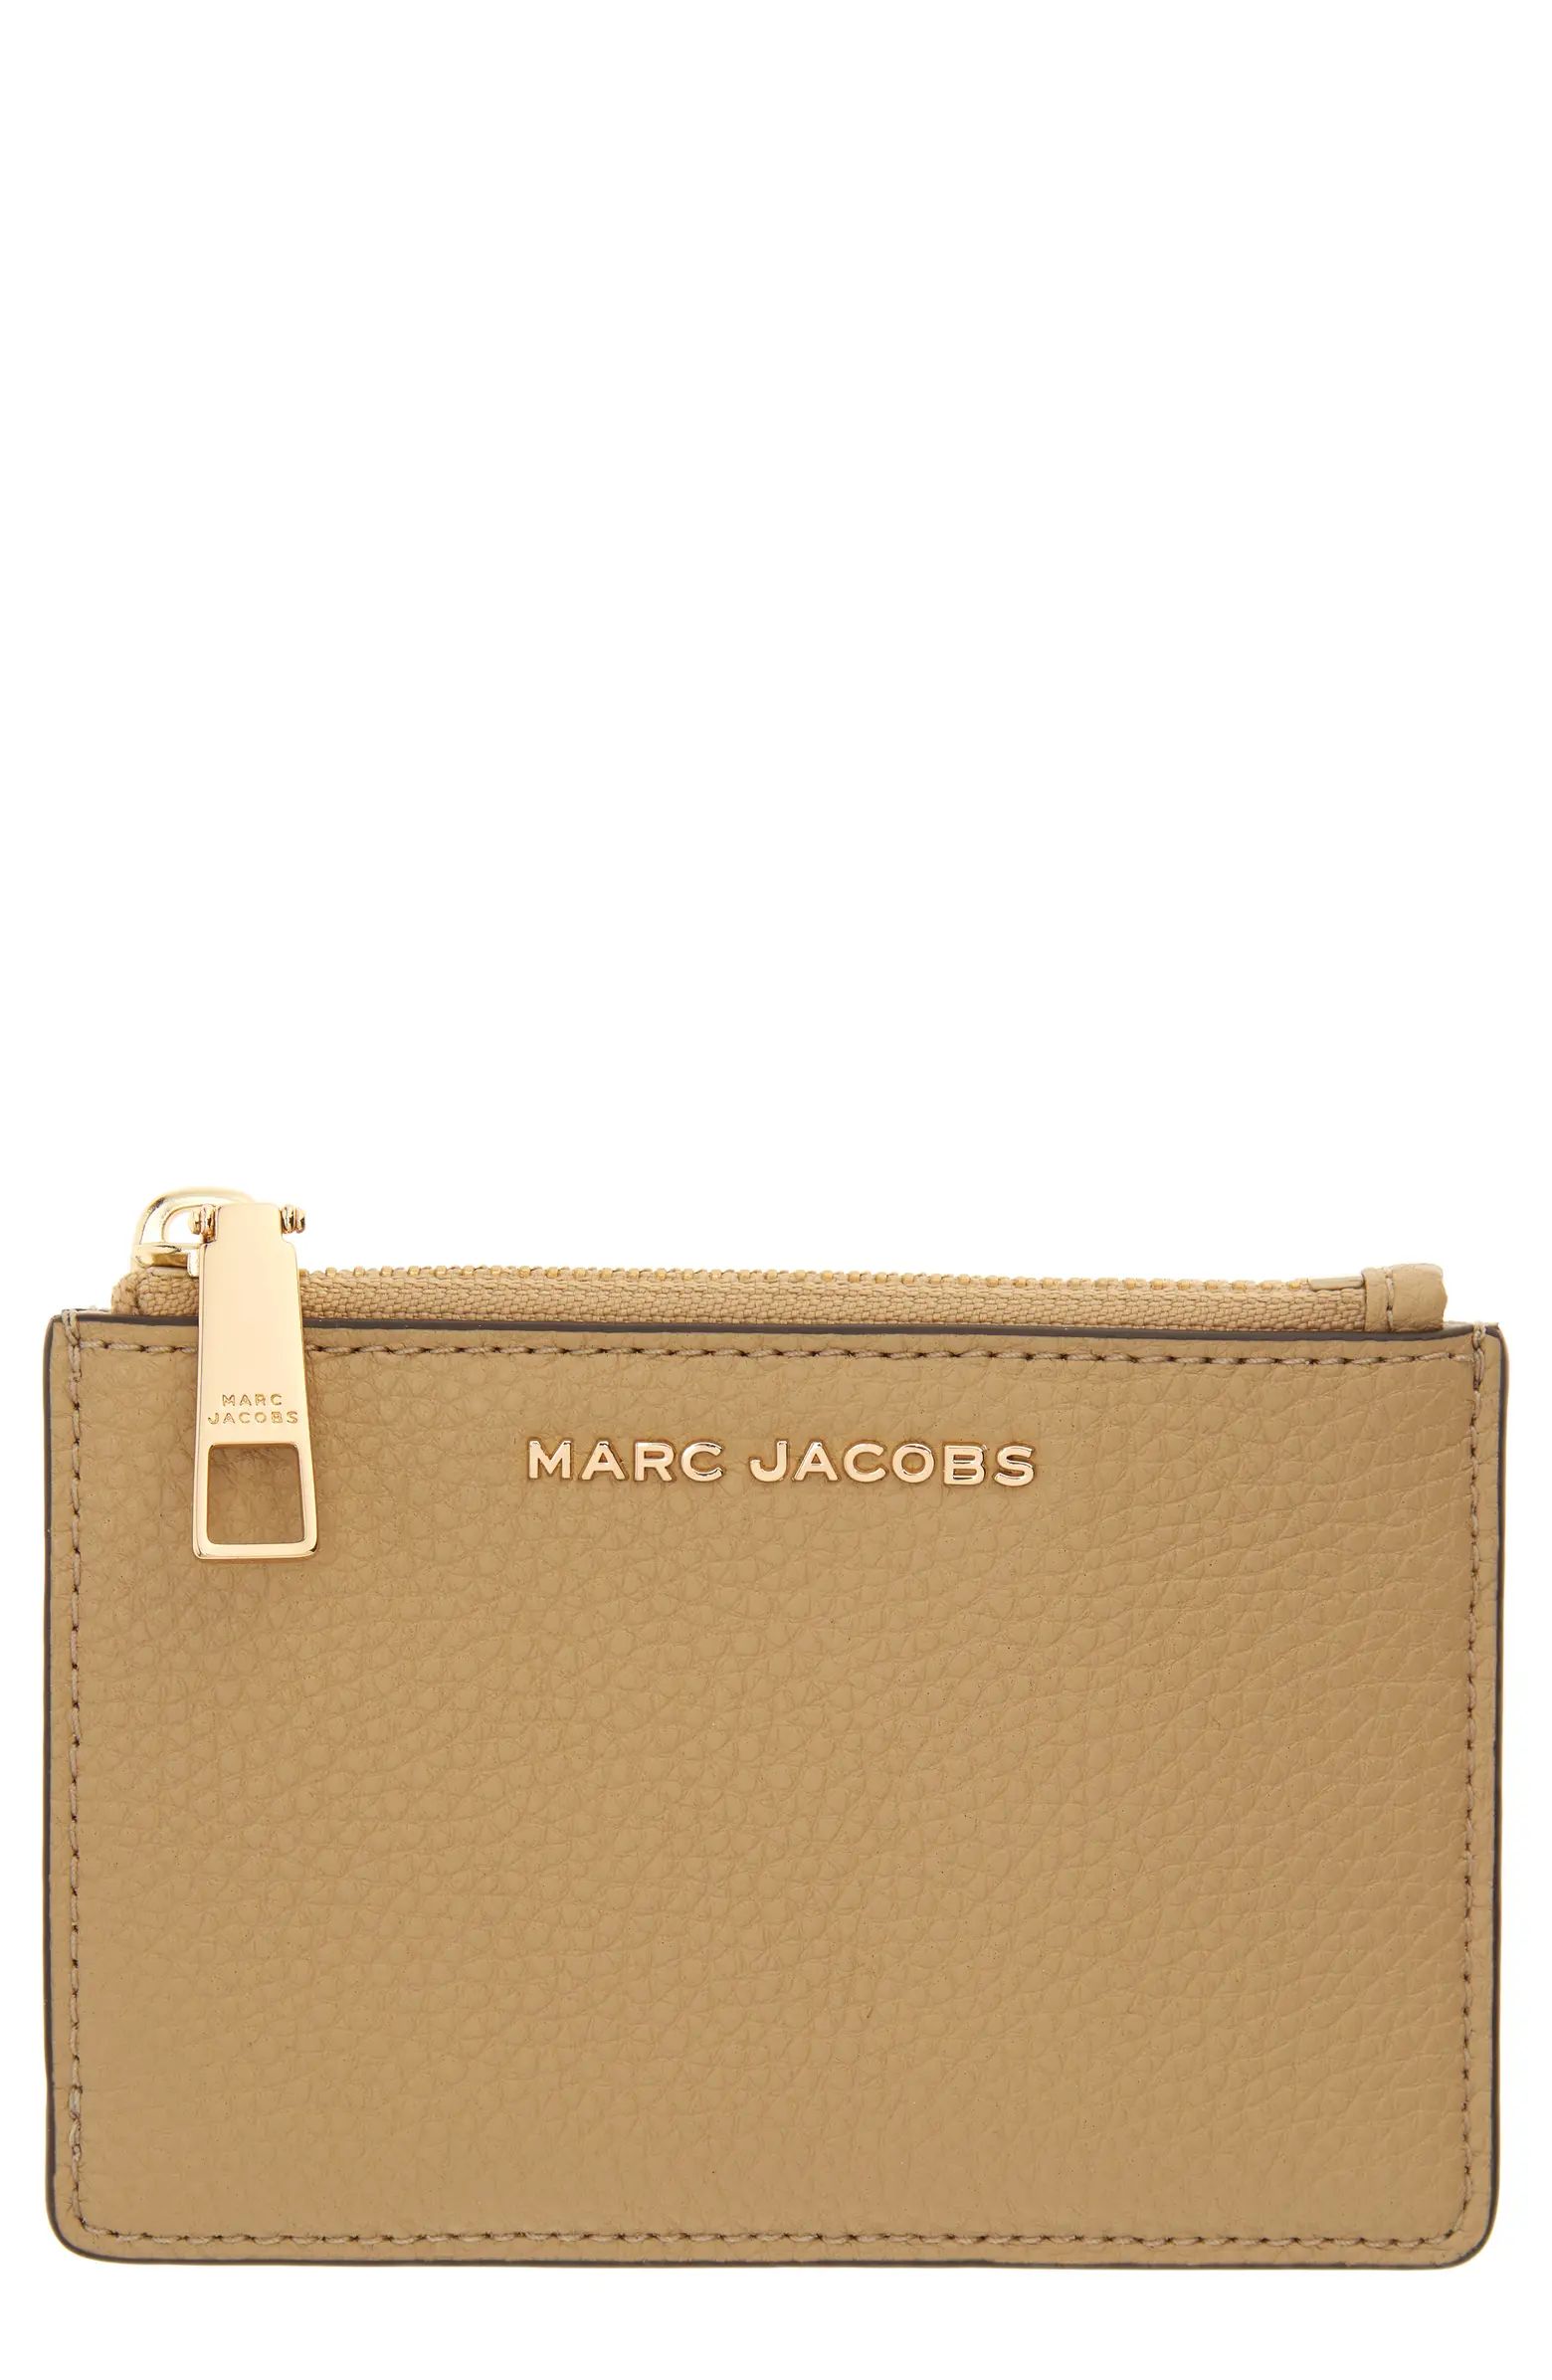 Marc Jacobs The Marc Jacobs The Simple Top Zip Leather Wallet | Nordstrom | Nordstrom